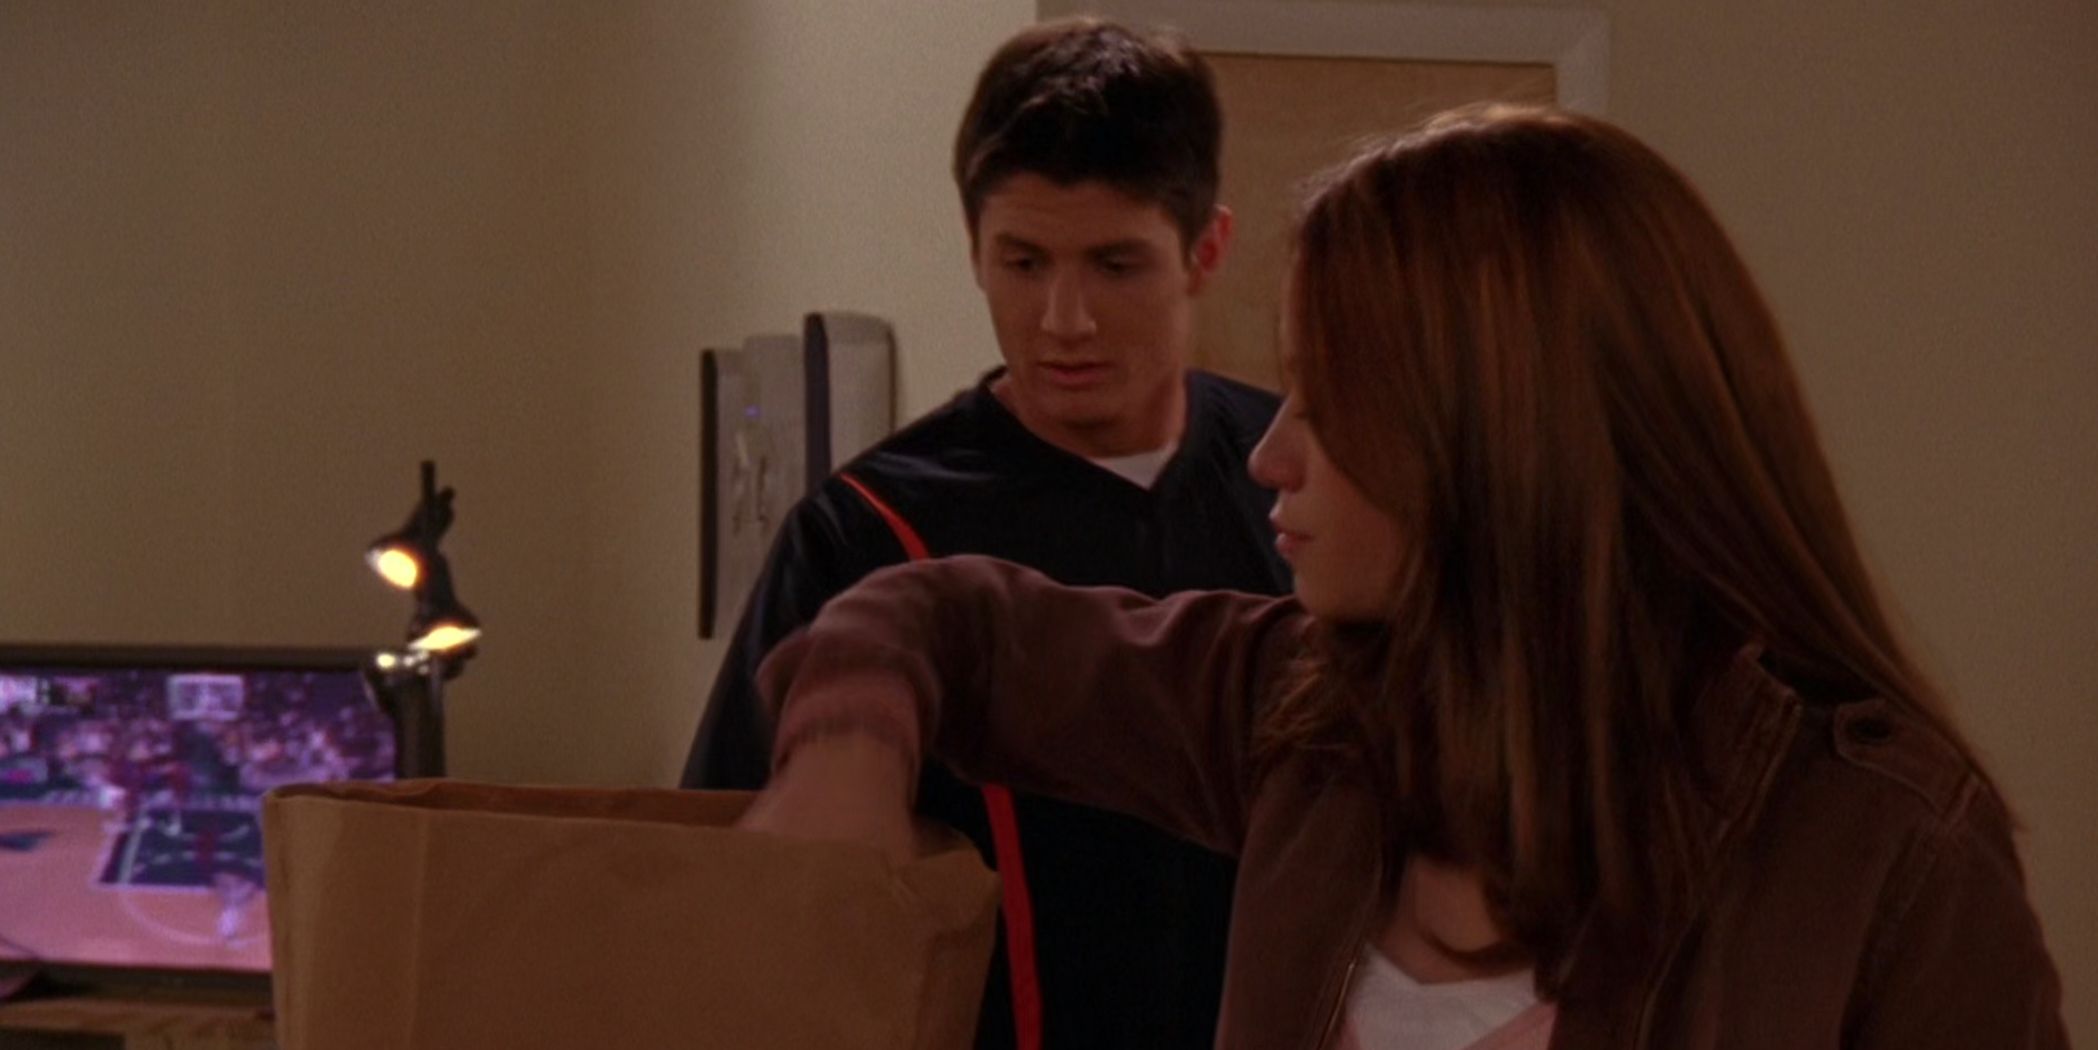 Haley brings Nathan groceries in One Tree Hill